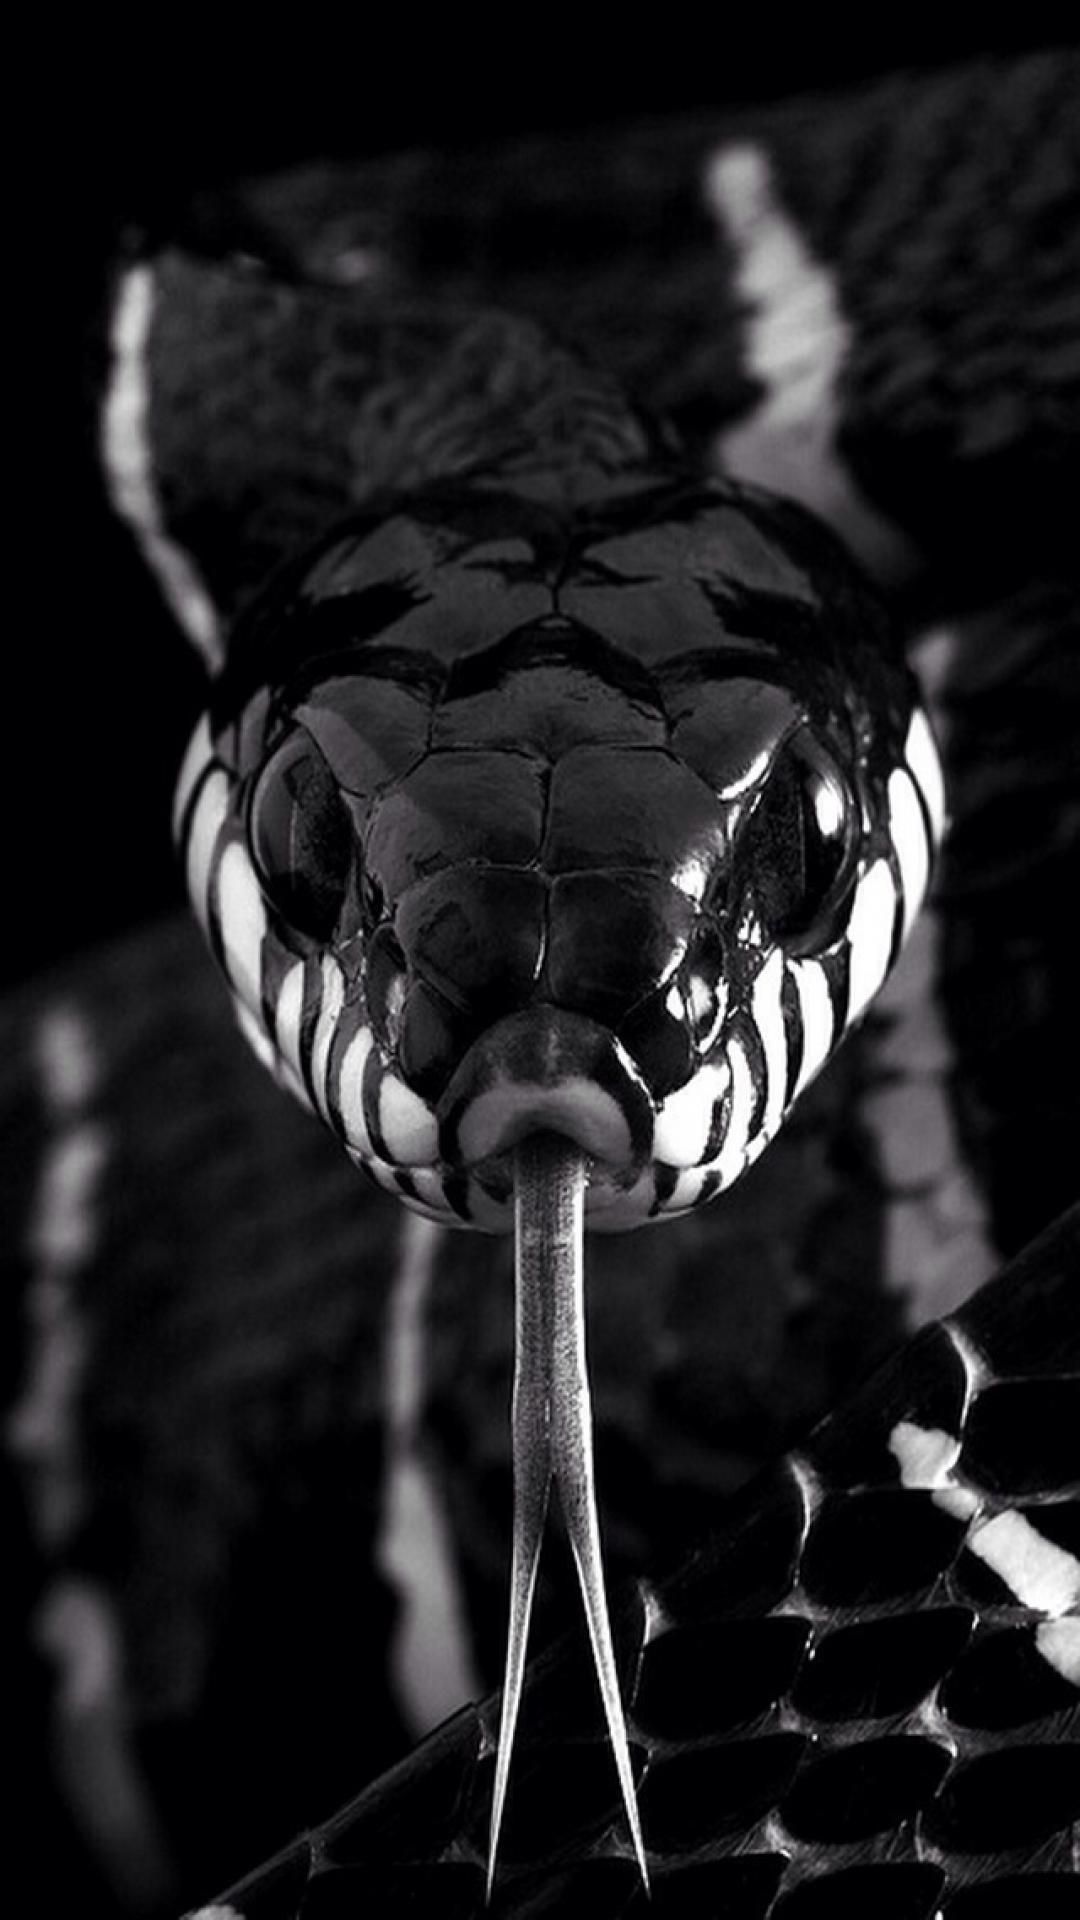 IPhone wallpaper with high-resolution black and white snake in front of a black background - Snake, black